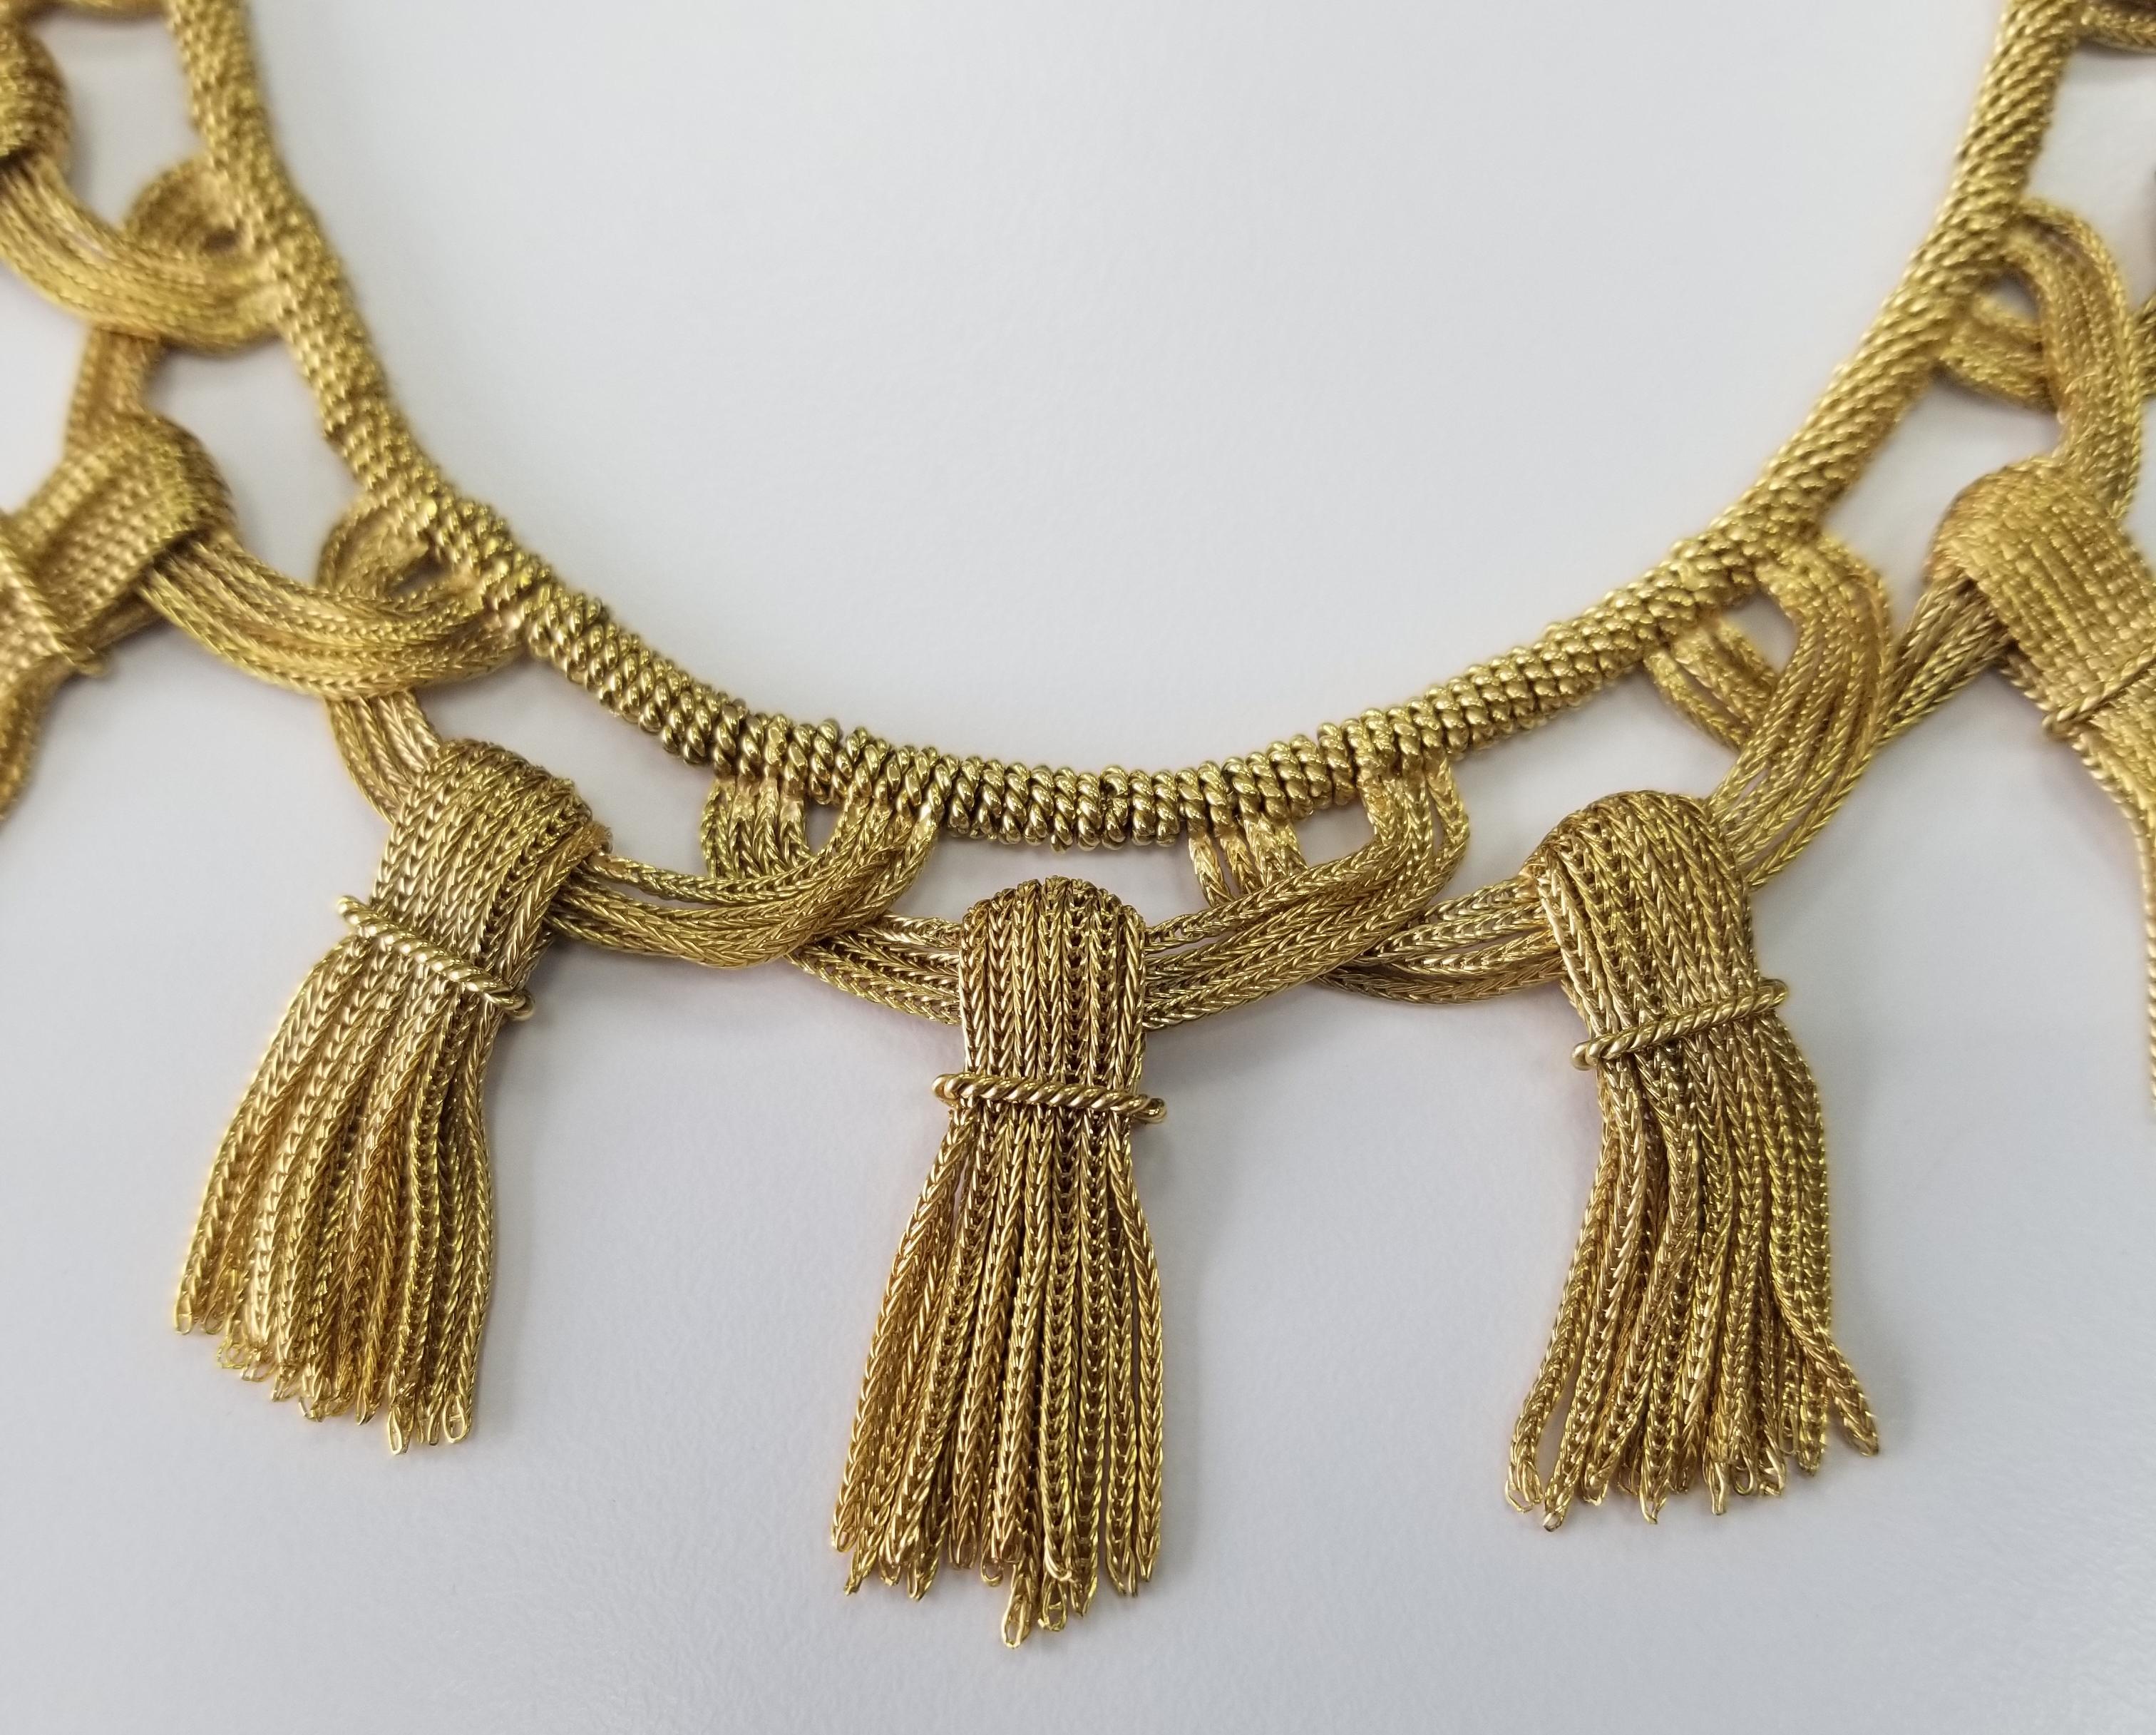 Total Vintage. A stunning 18K gold necklace tassel necklace fastened with a push clasp and safety; measures 15 1/4 inches in length; tassels are 1 1/2 inches long; ; total weight 128.5 g. Tiffany inspired . Stamped: 18K. The piece lays perfectly on